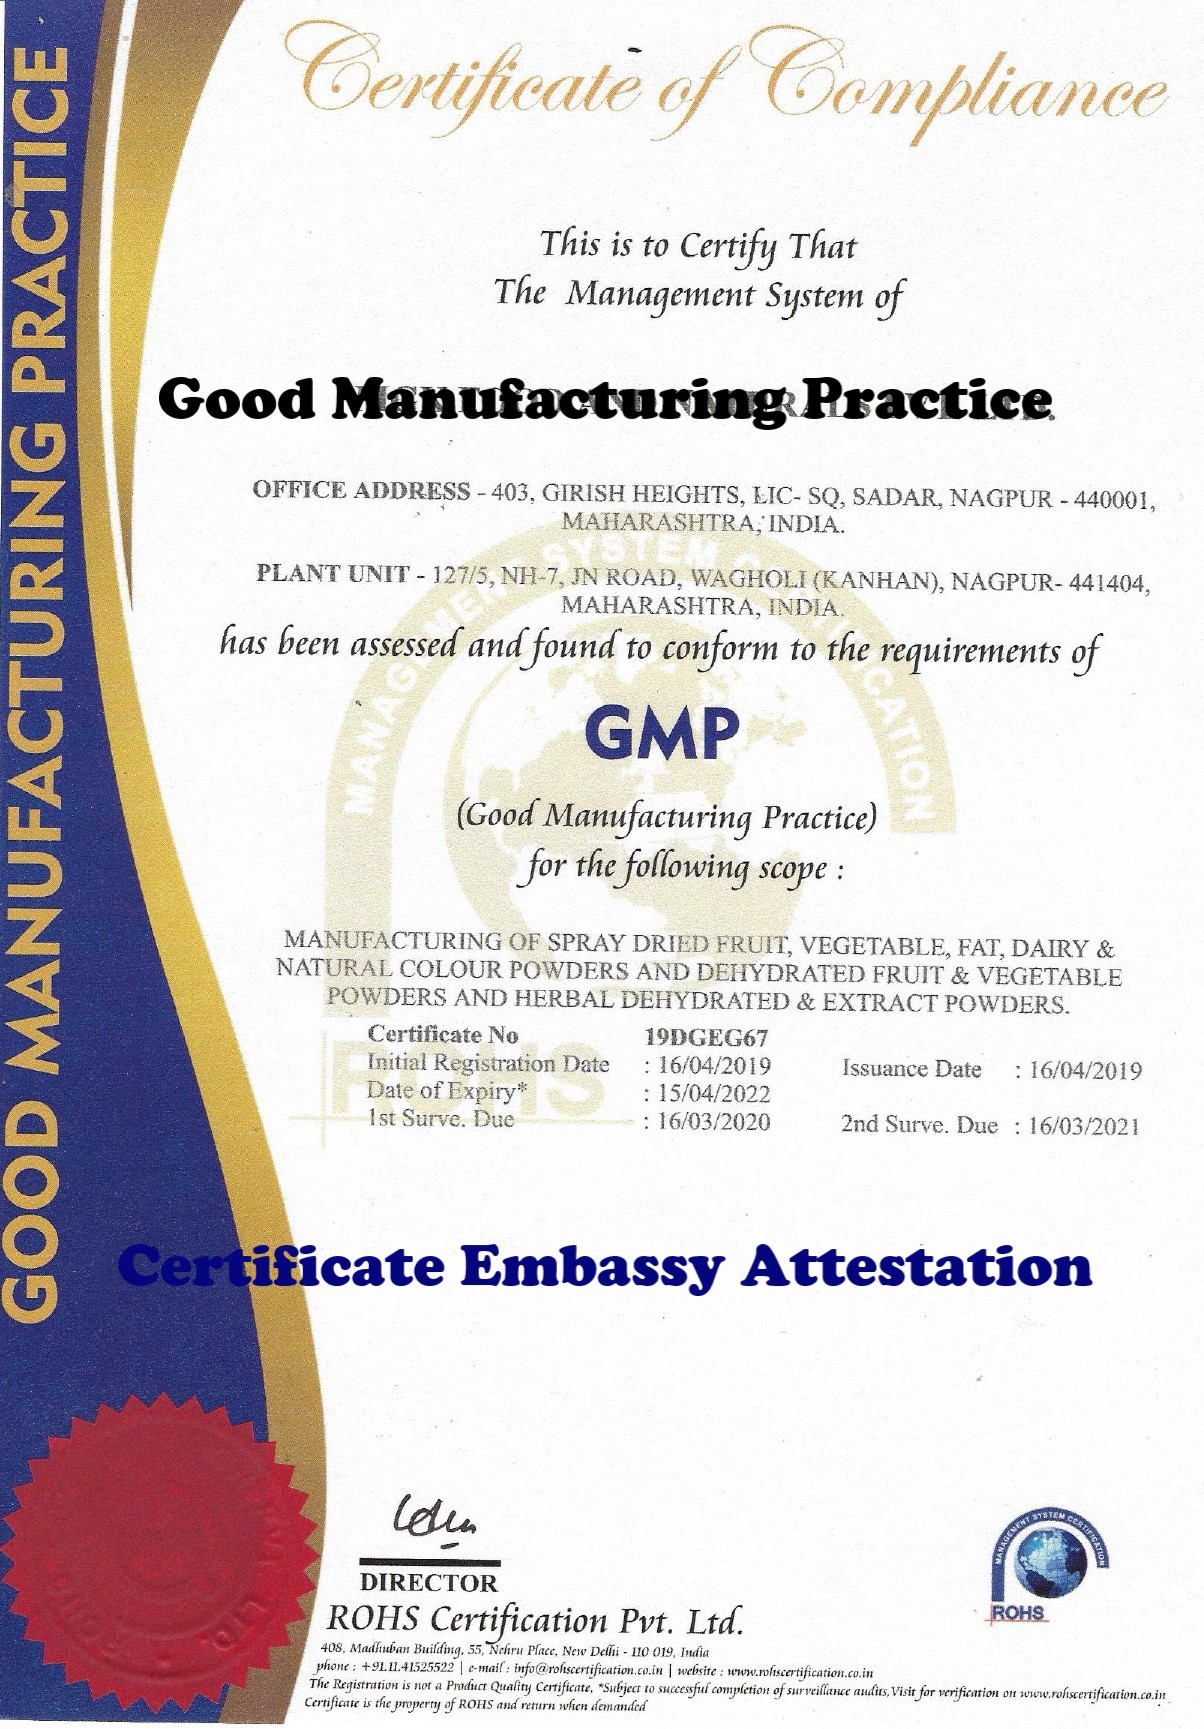 GMP Certificate Attestation from Antigua and Barbuda Embassy